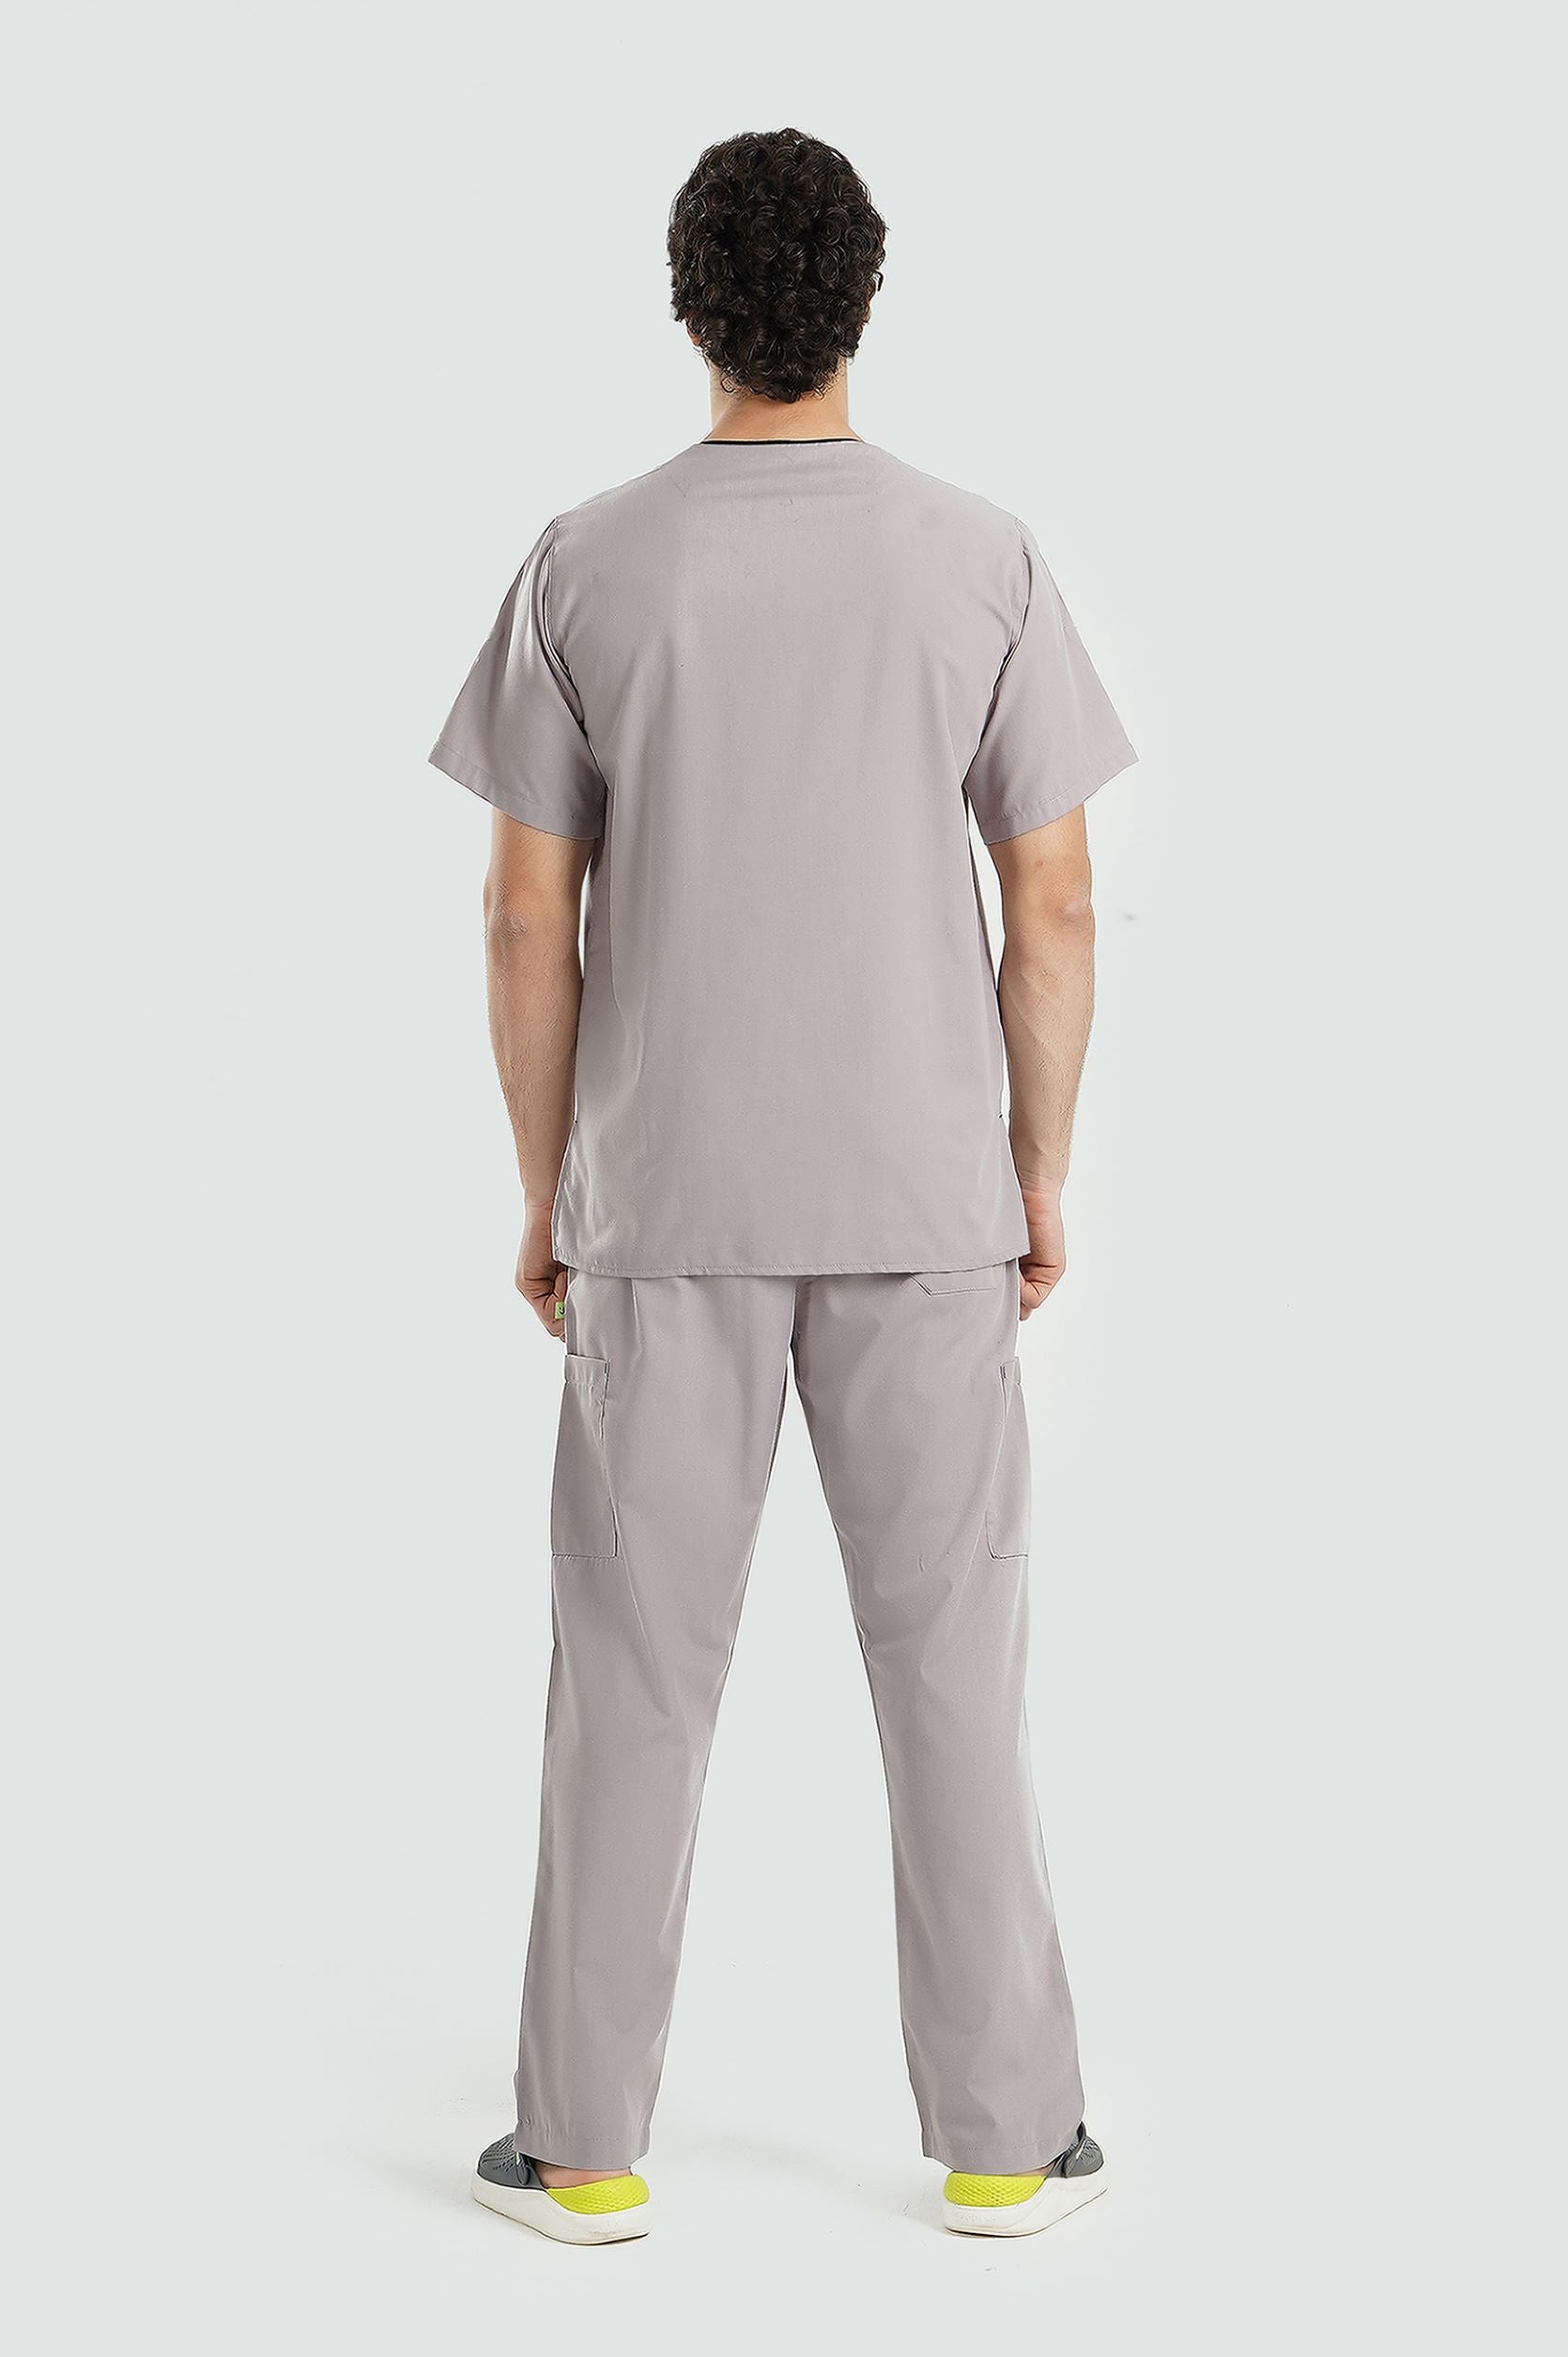 These sleek, stylish jogger scrub pants are super comfy but have a  streamlined, urban-inspired fe… | Medical scrubs outfit, Nurse outfit  scrubs, Cute scrubs uniform